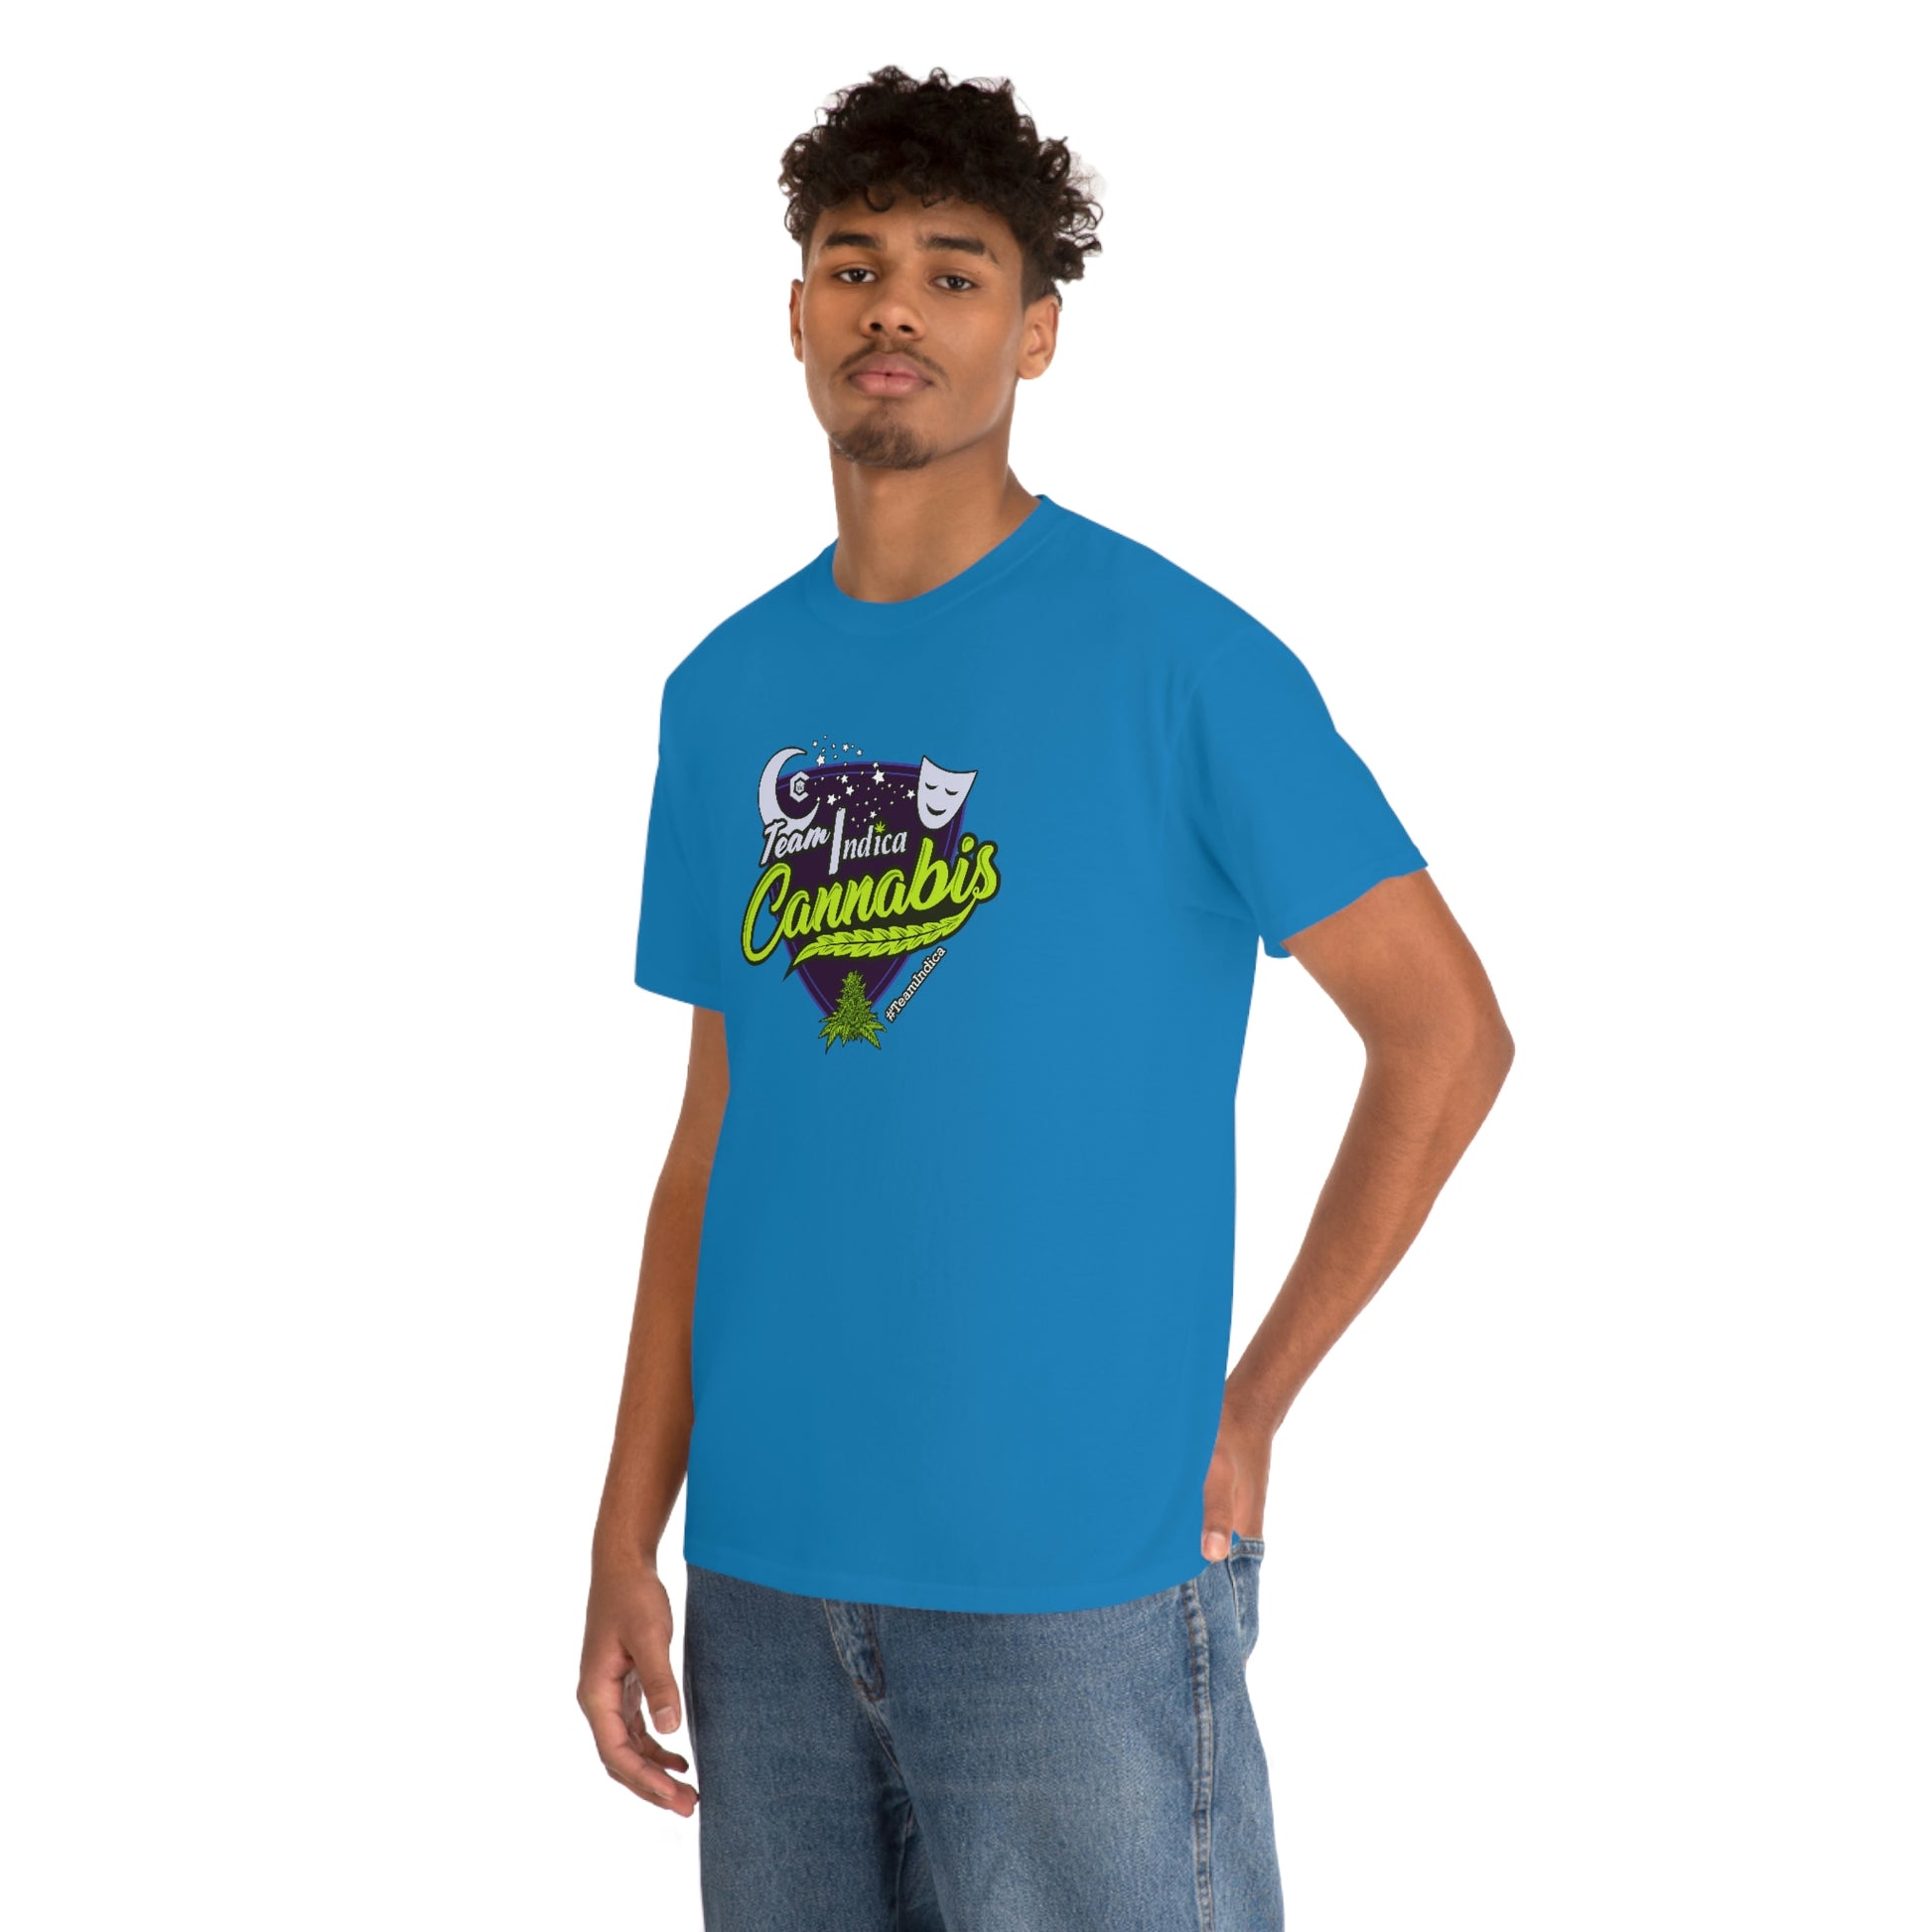 a young man wearing a Team Indica Cannabis T-Shirt with a green and purple logo.